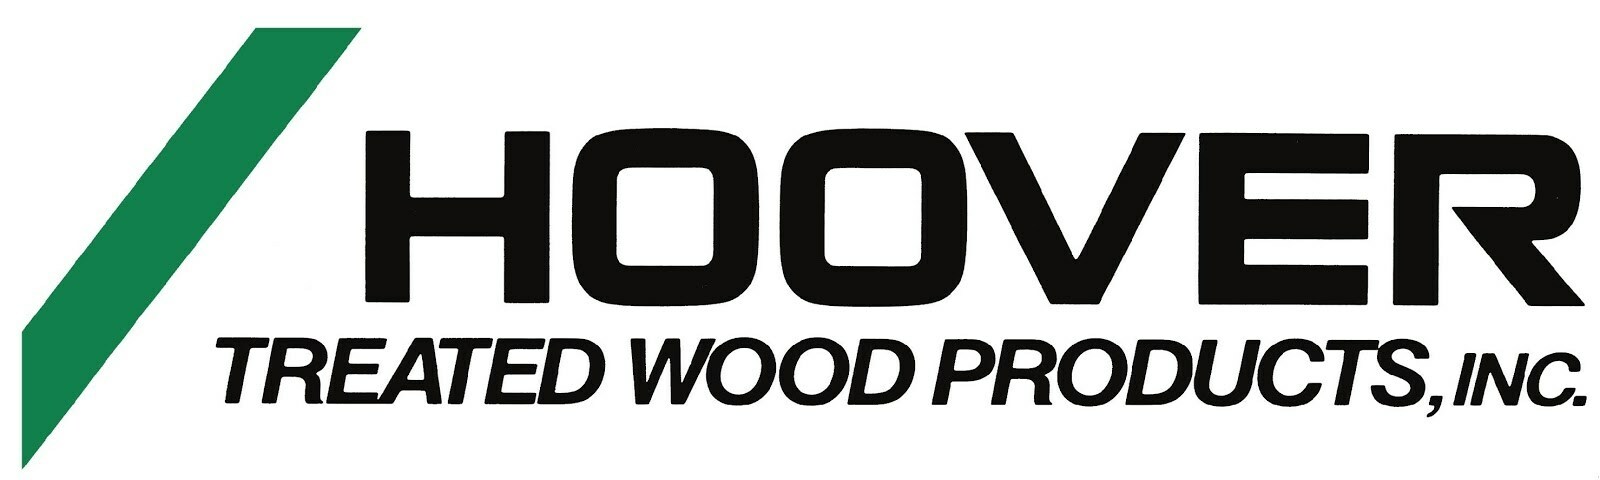 Hoover Treated Wood Products Logo